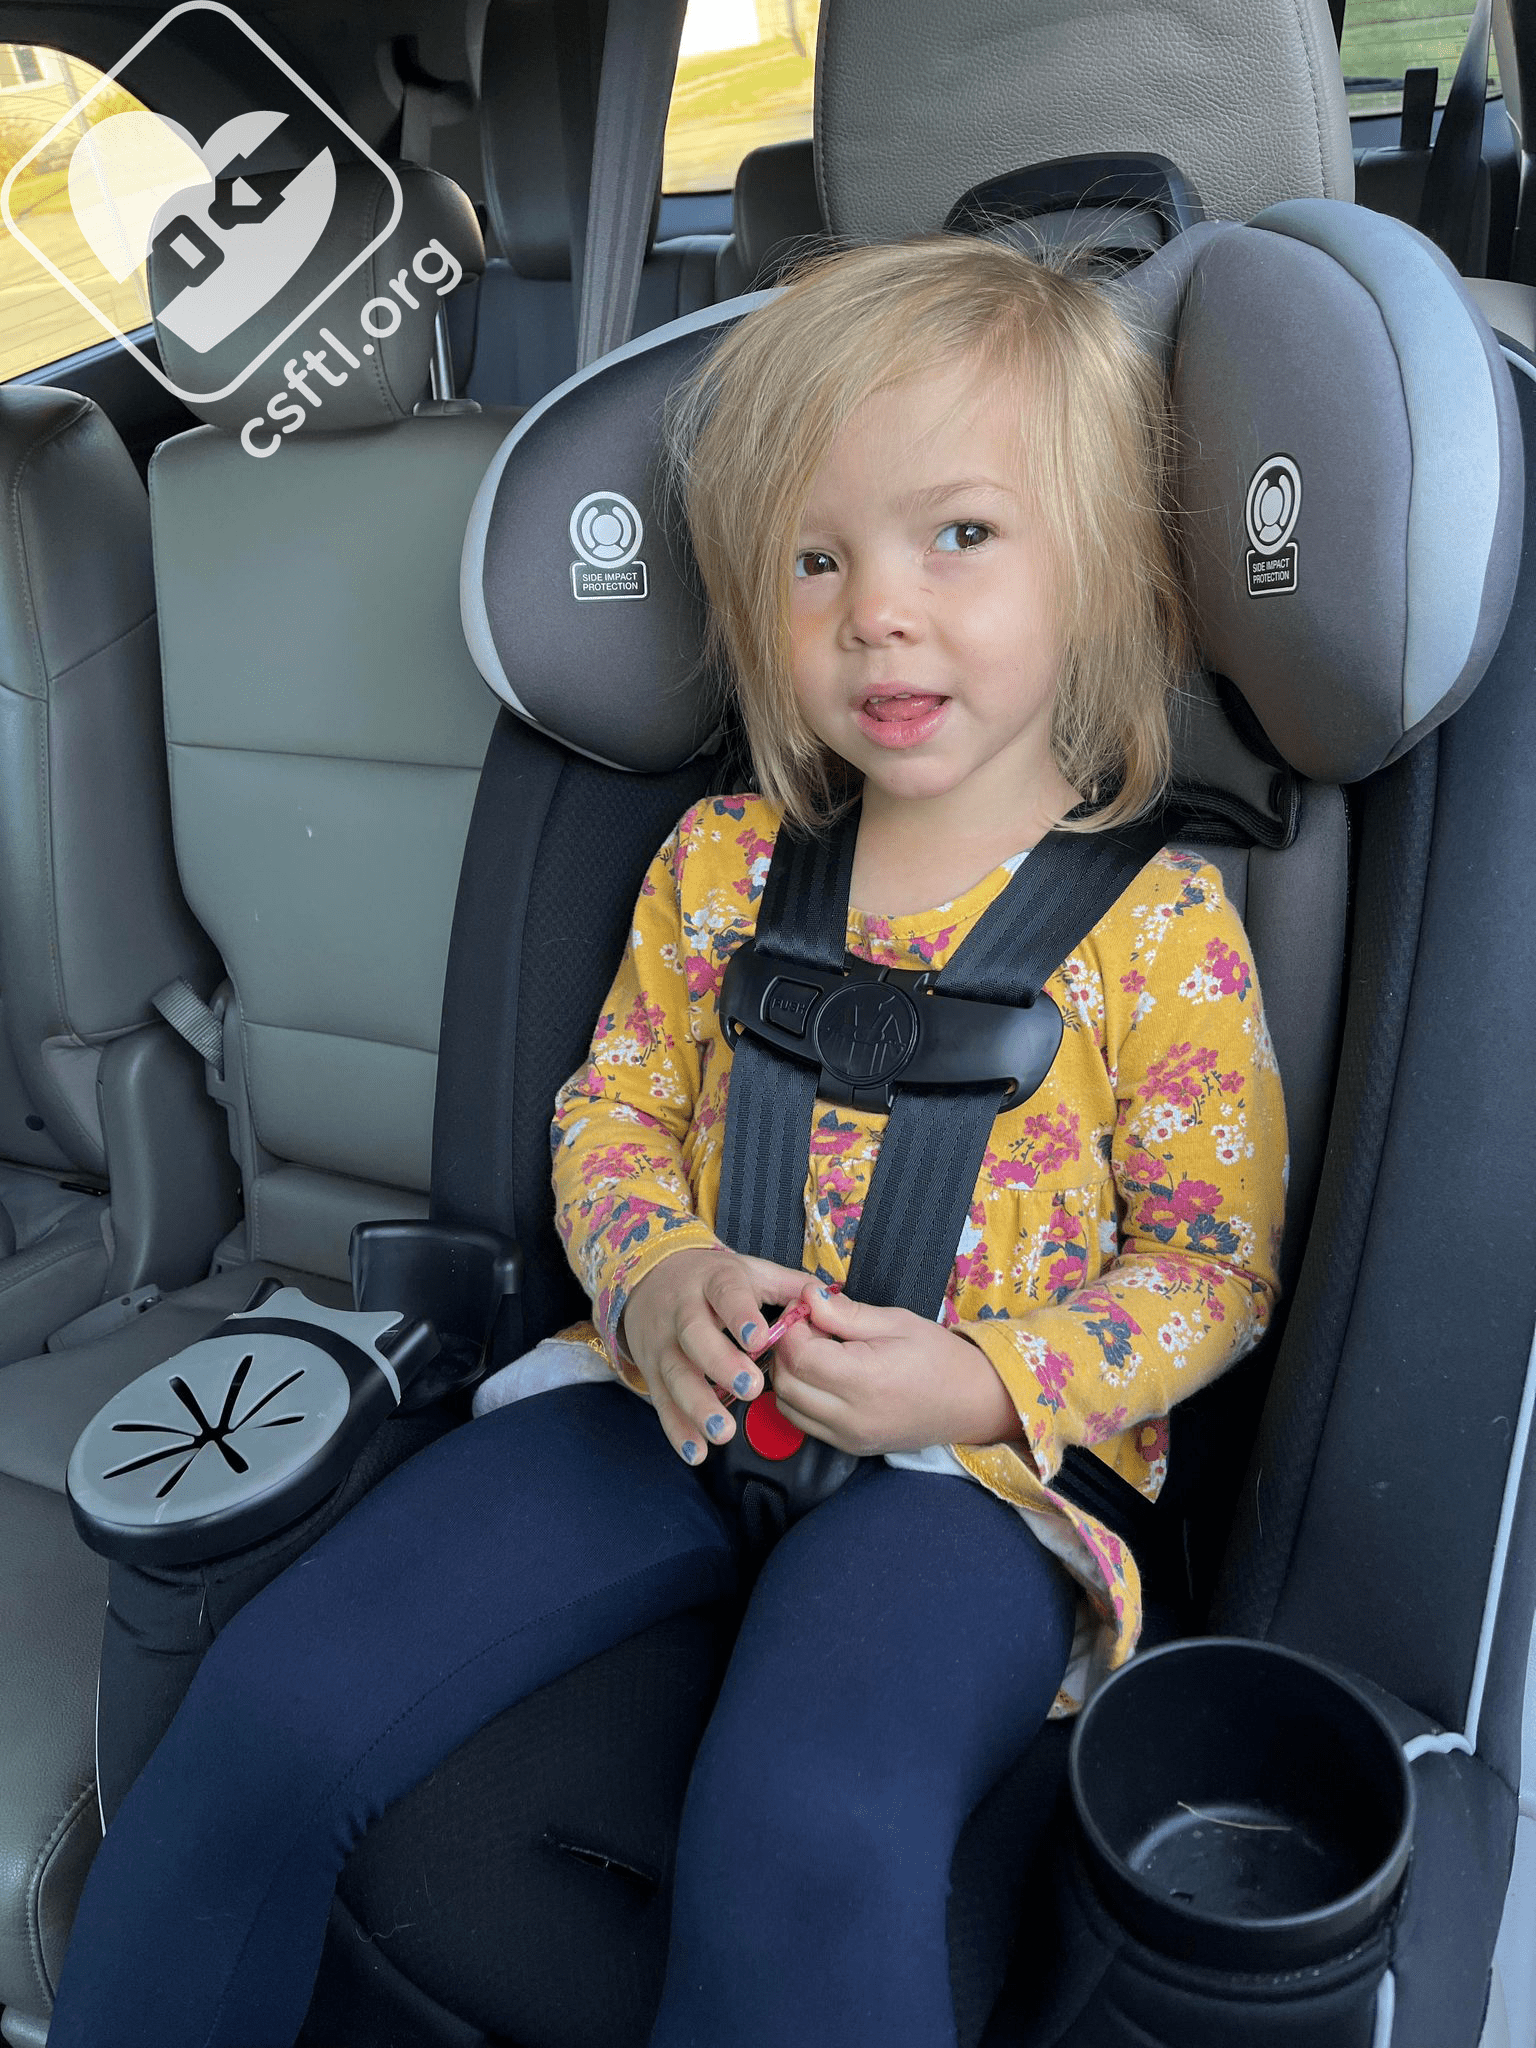 Safety 1st Grow and Go All-in-One Convertible Car Seat, Rear-facing 5-40  pounds, Forward-facing 22-65 pounds, and Belt-positioning booster 40-100